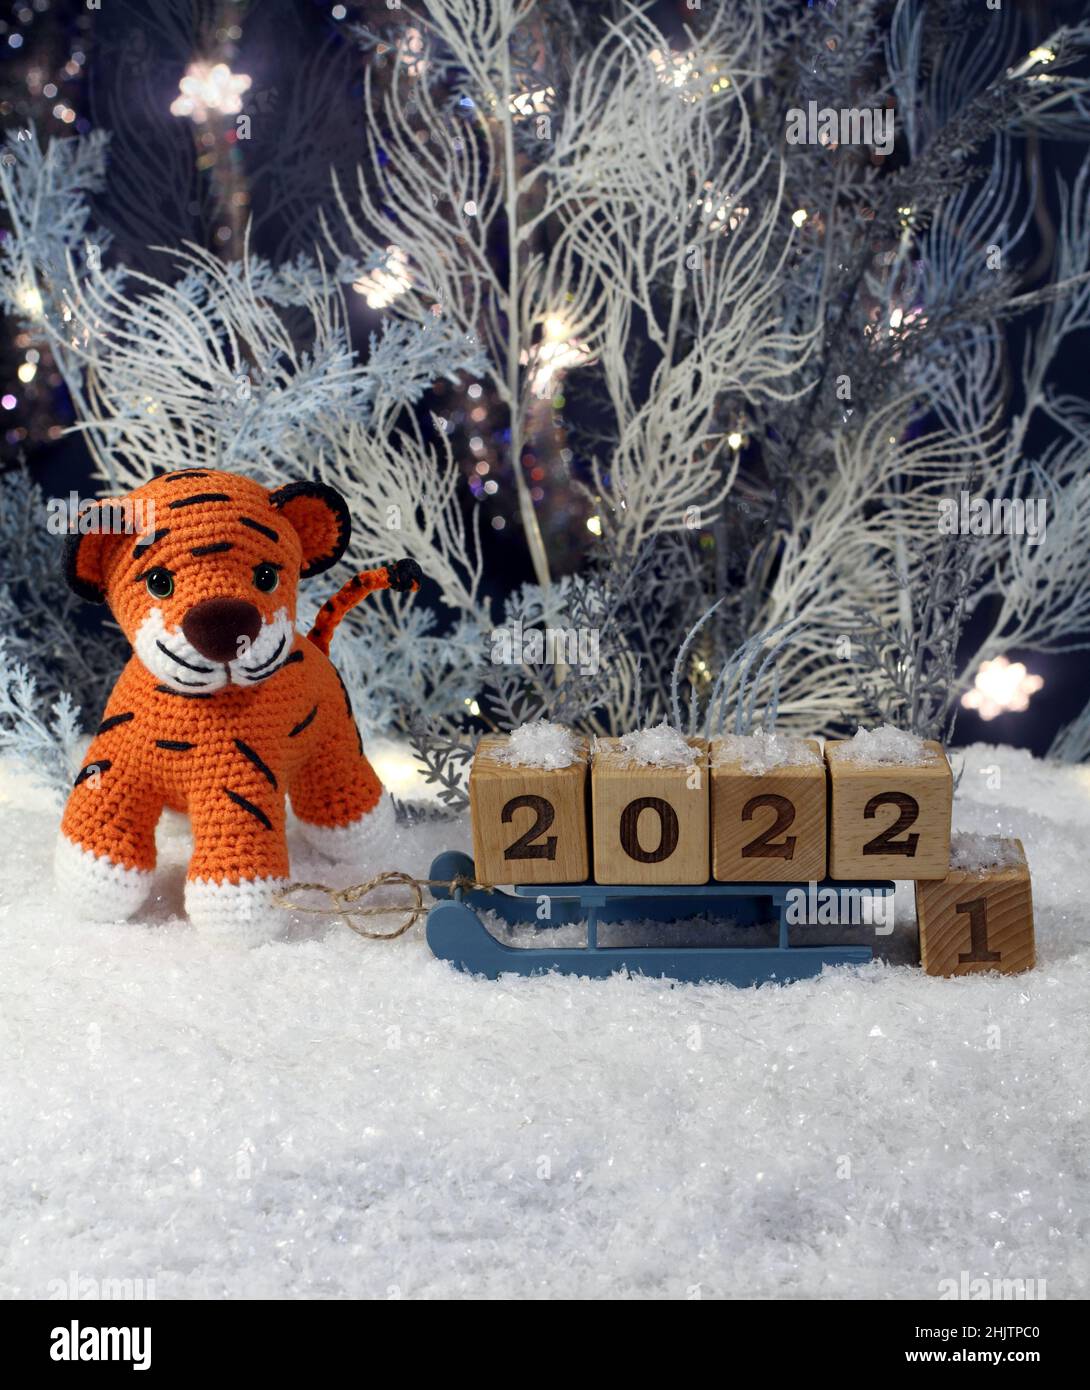 A knitted toy tiger stands on artificial snow and a toy sledge with wooden cubes with the numbers 2022 stands next to him against the backdrop of blue Stock Photo